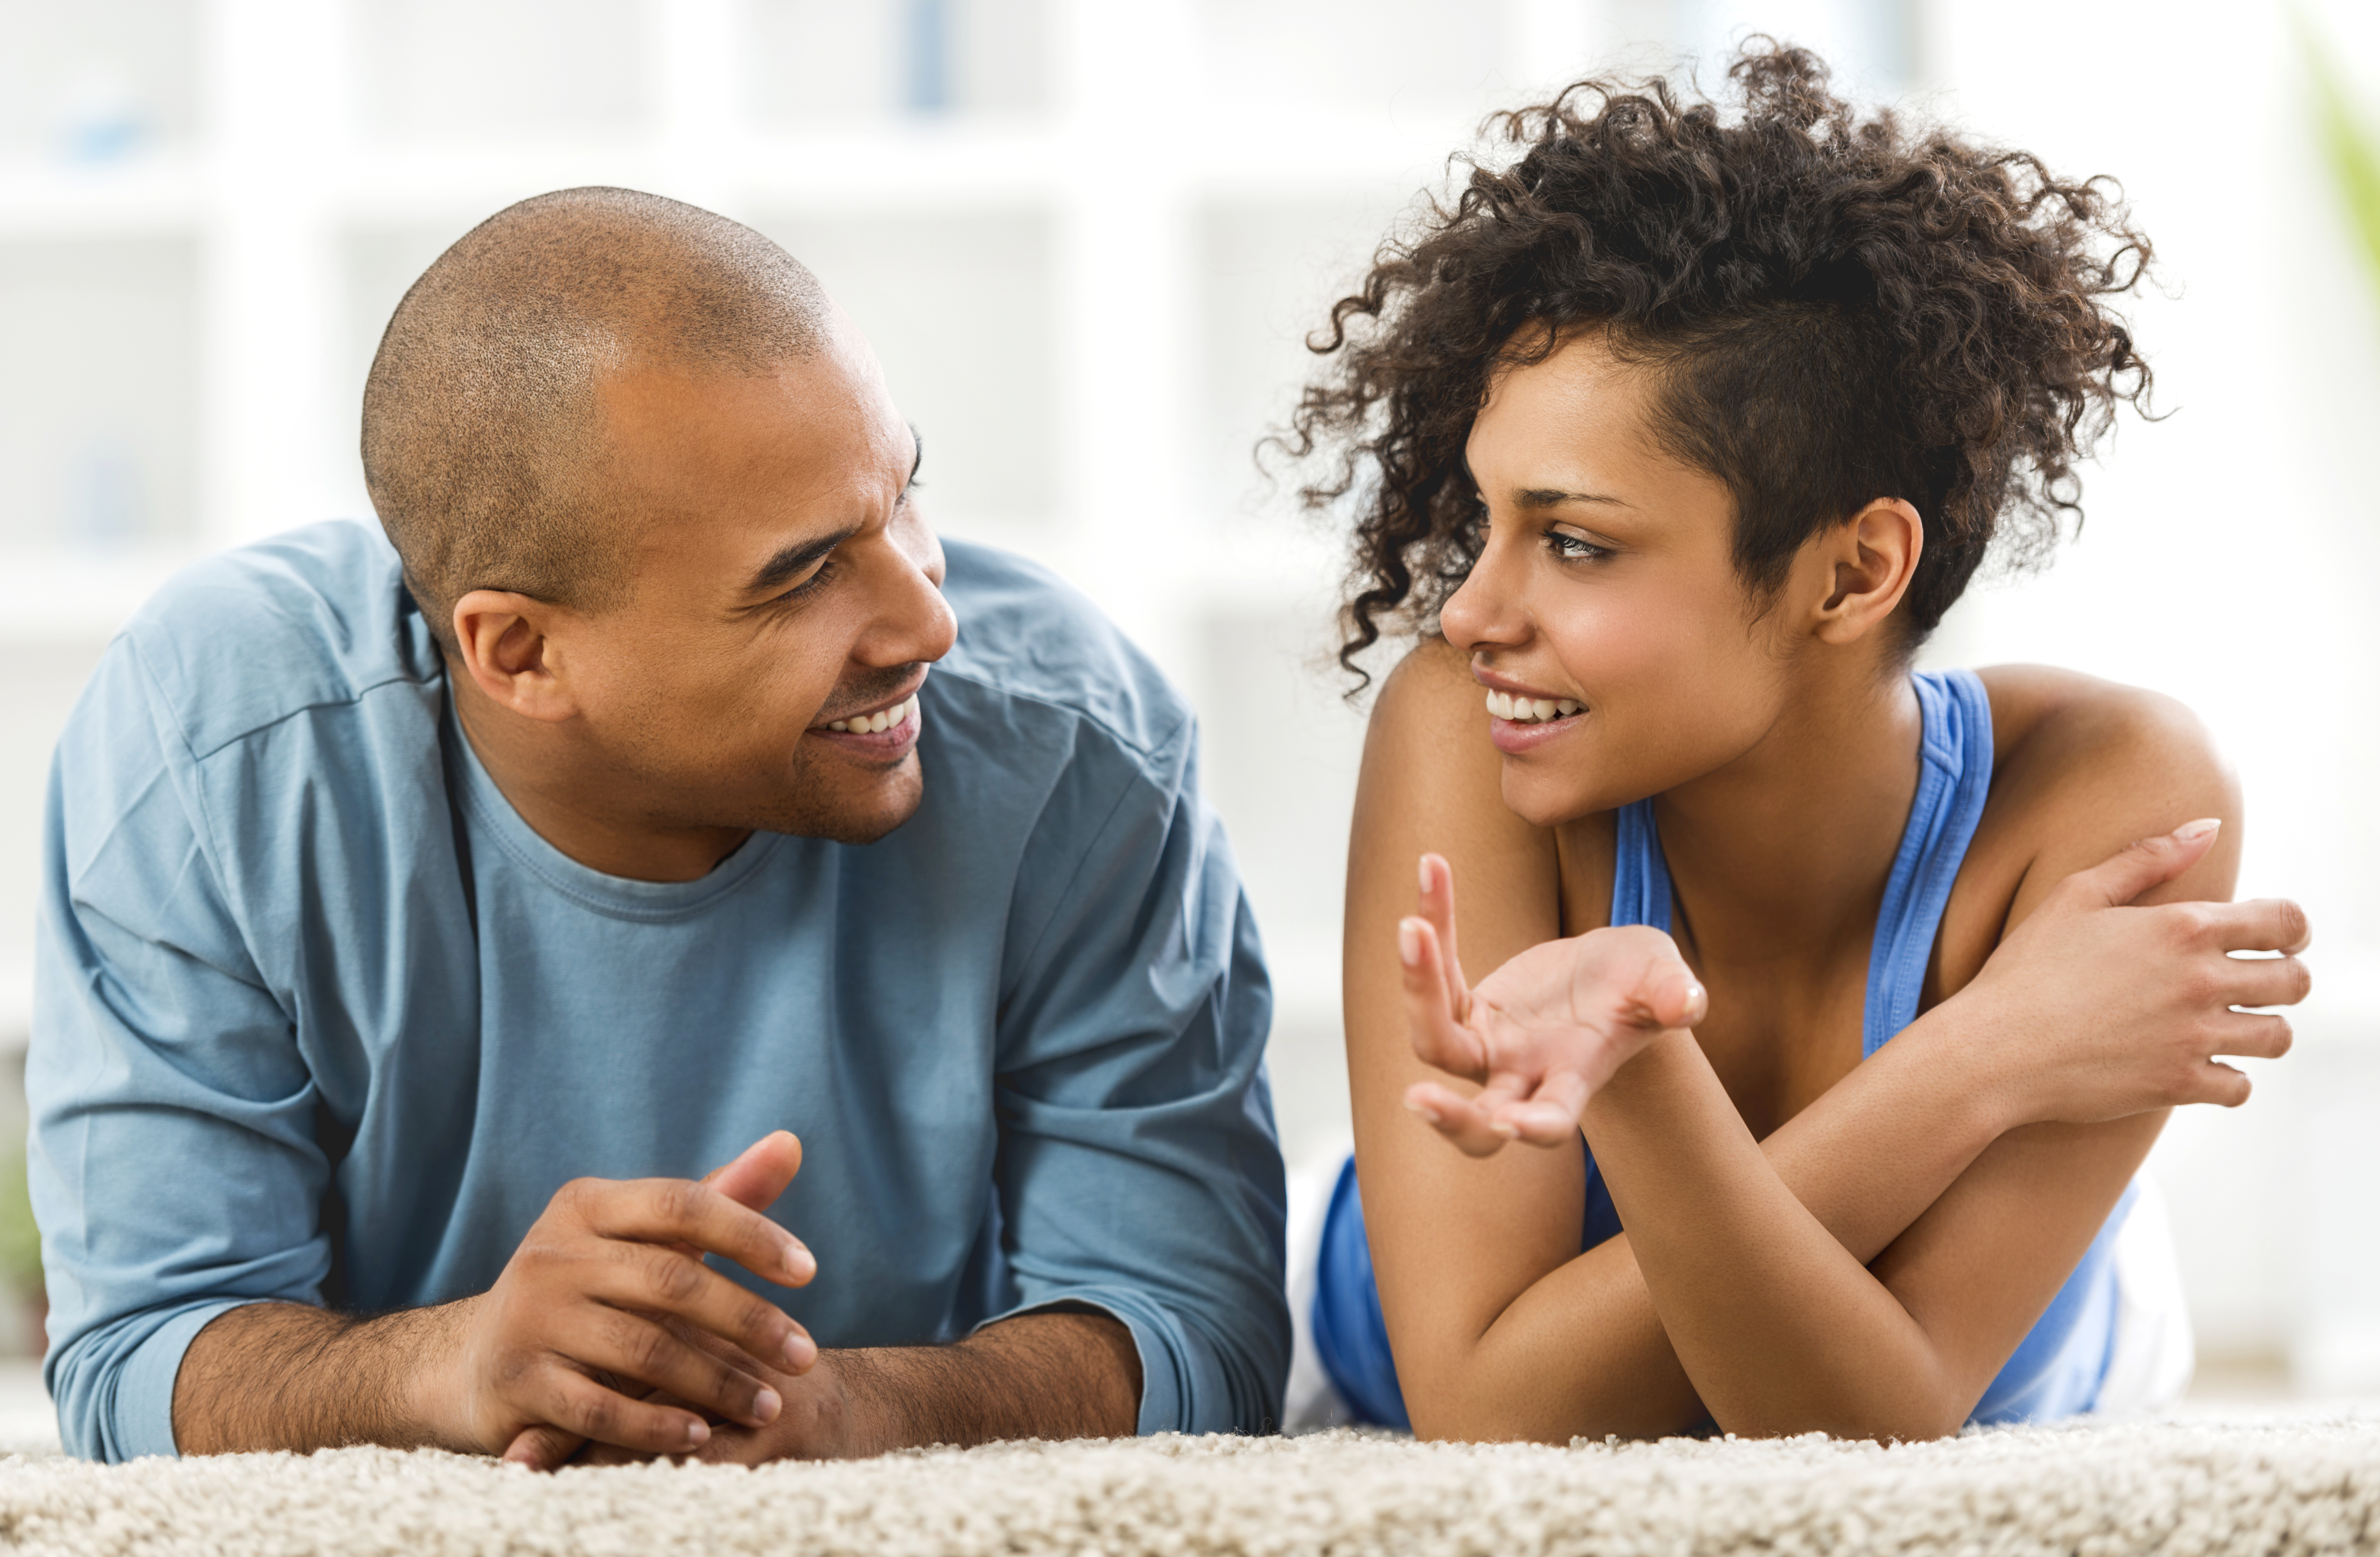 Smiling African American couple lying on carpet and communicating.